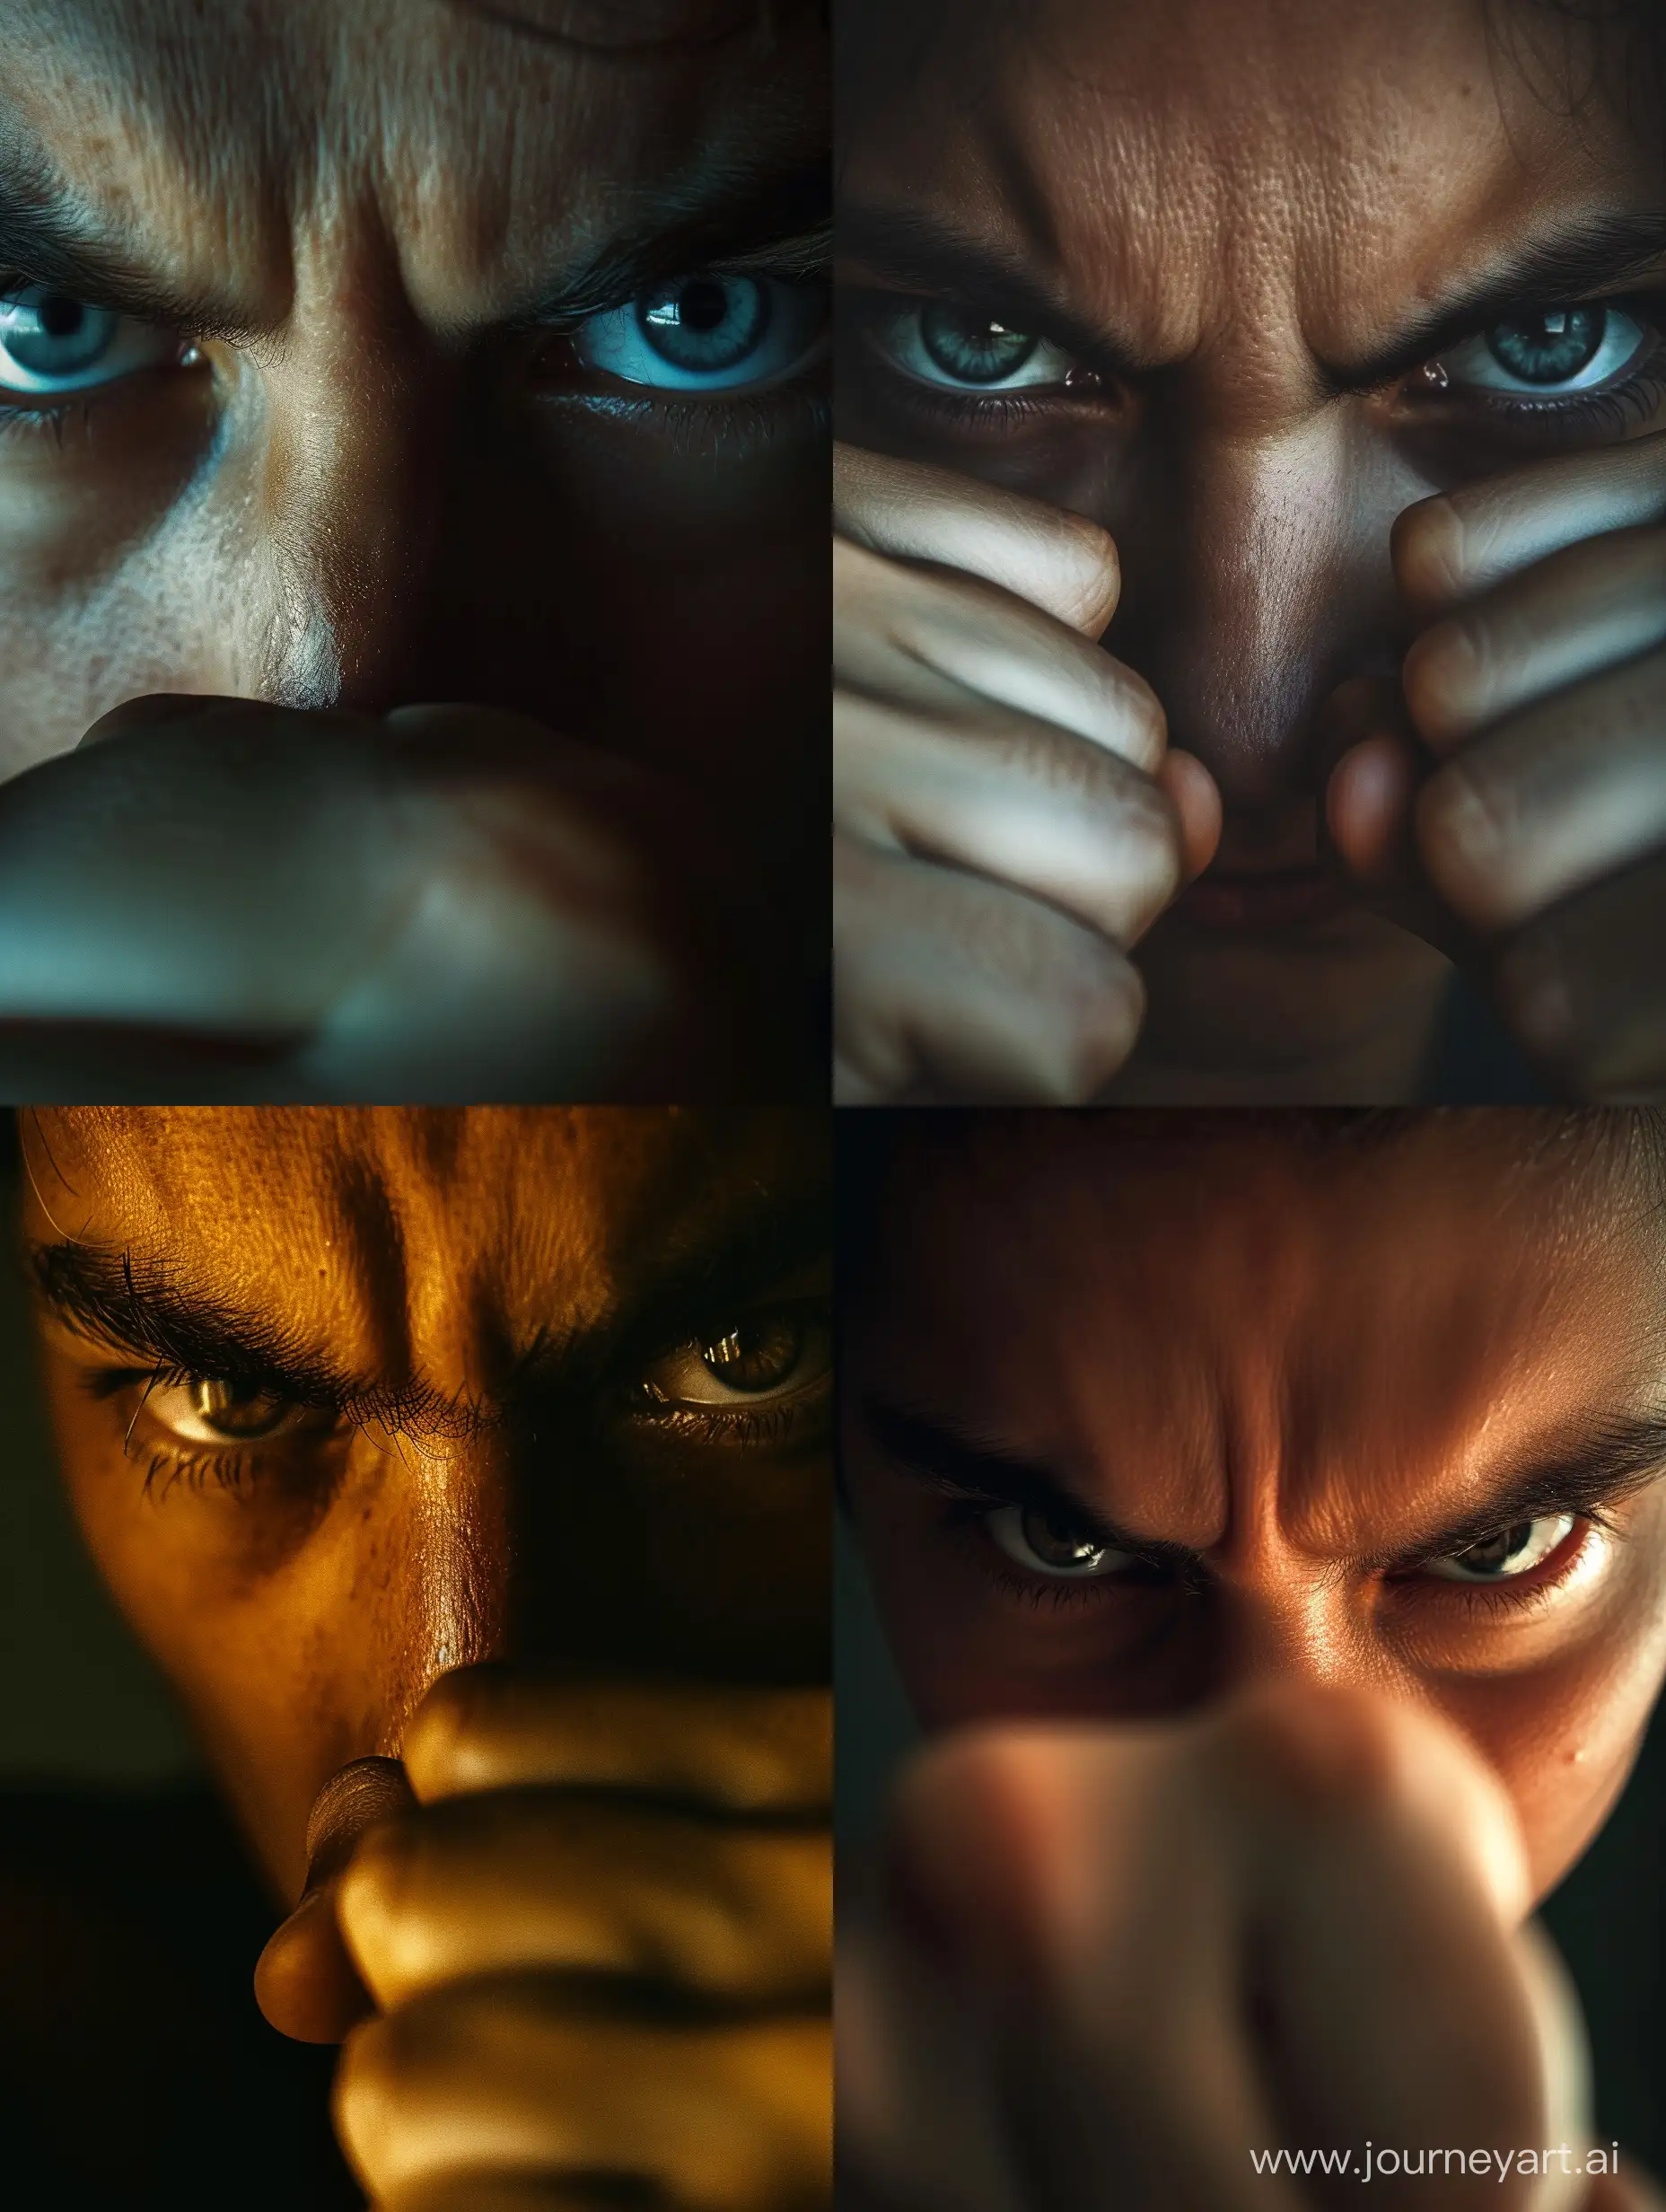 A close-up of someone's focused eyes or a clenched fist, portraying determination and resilience.